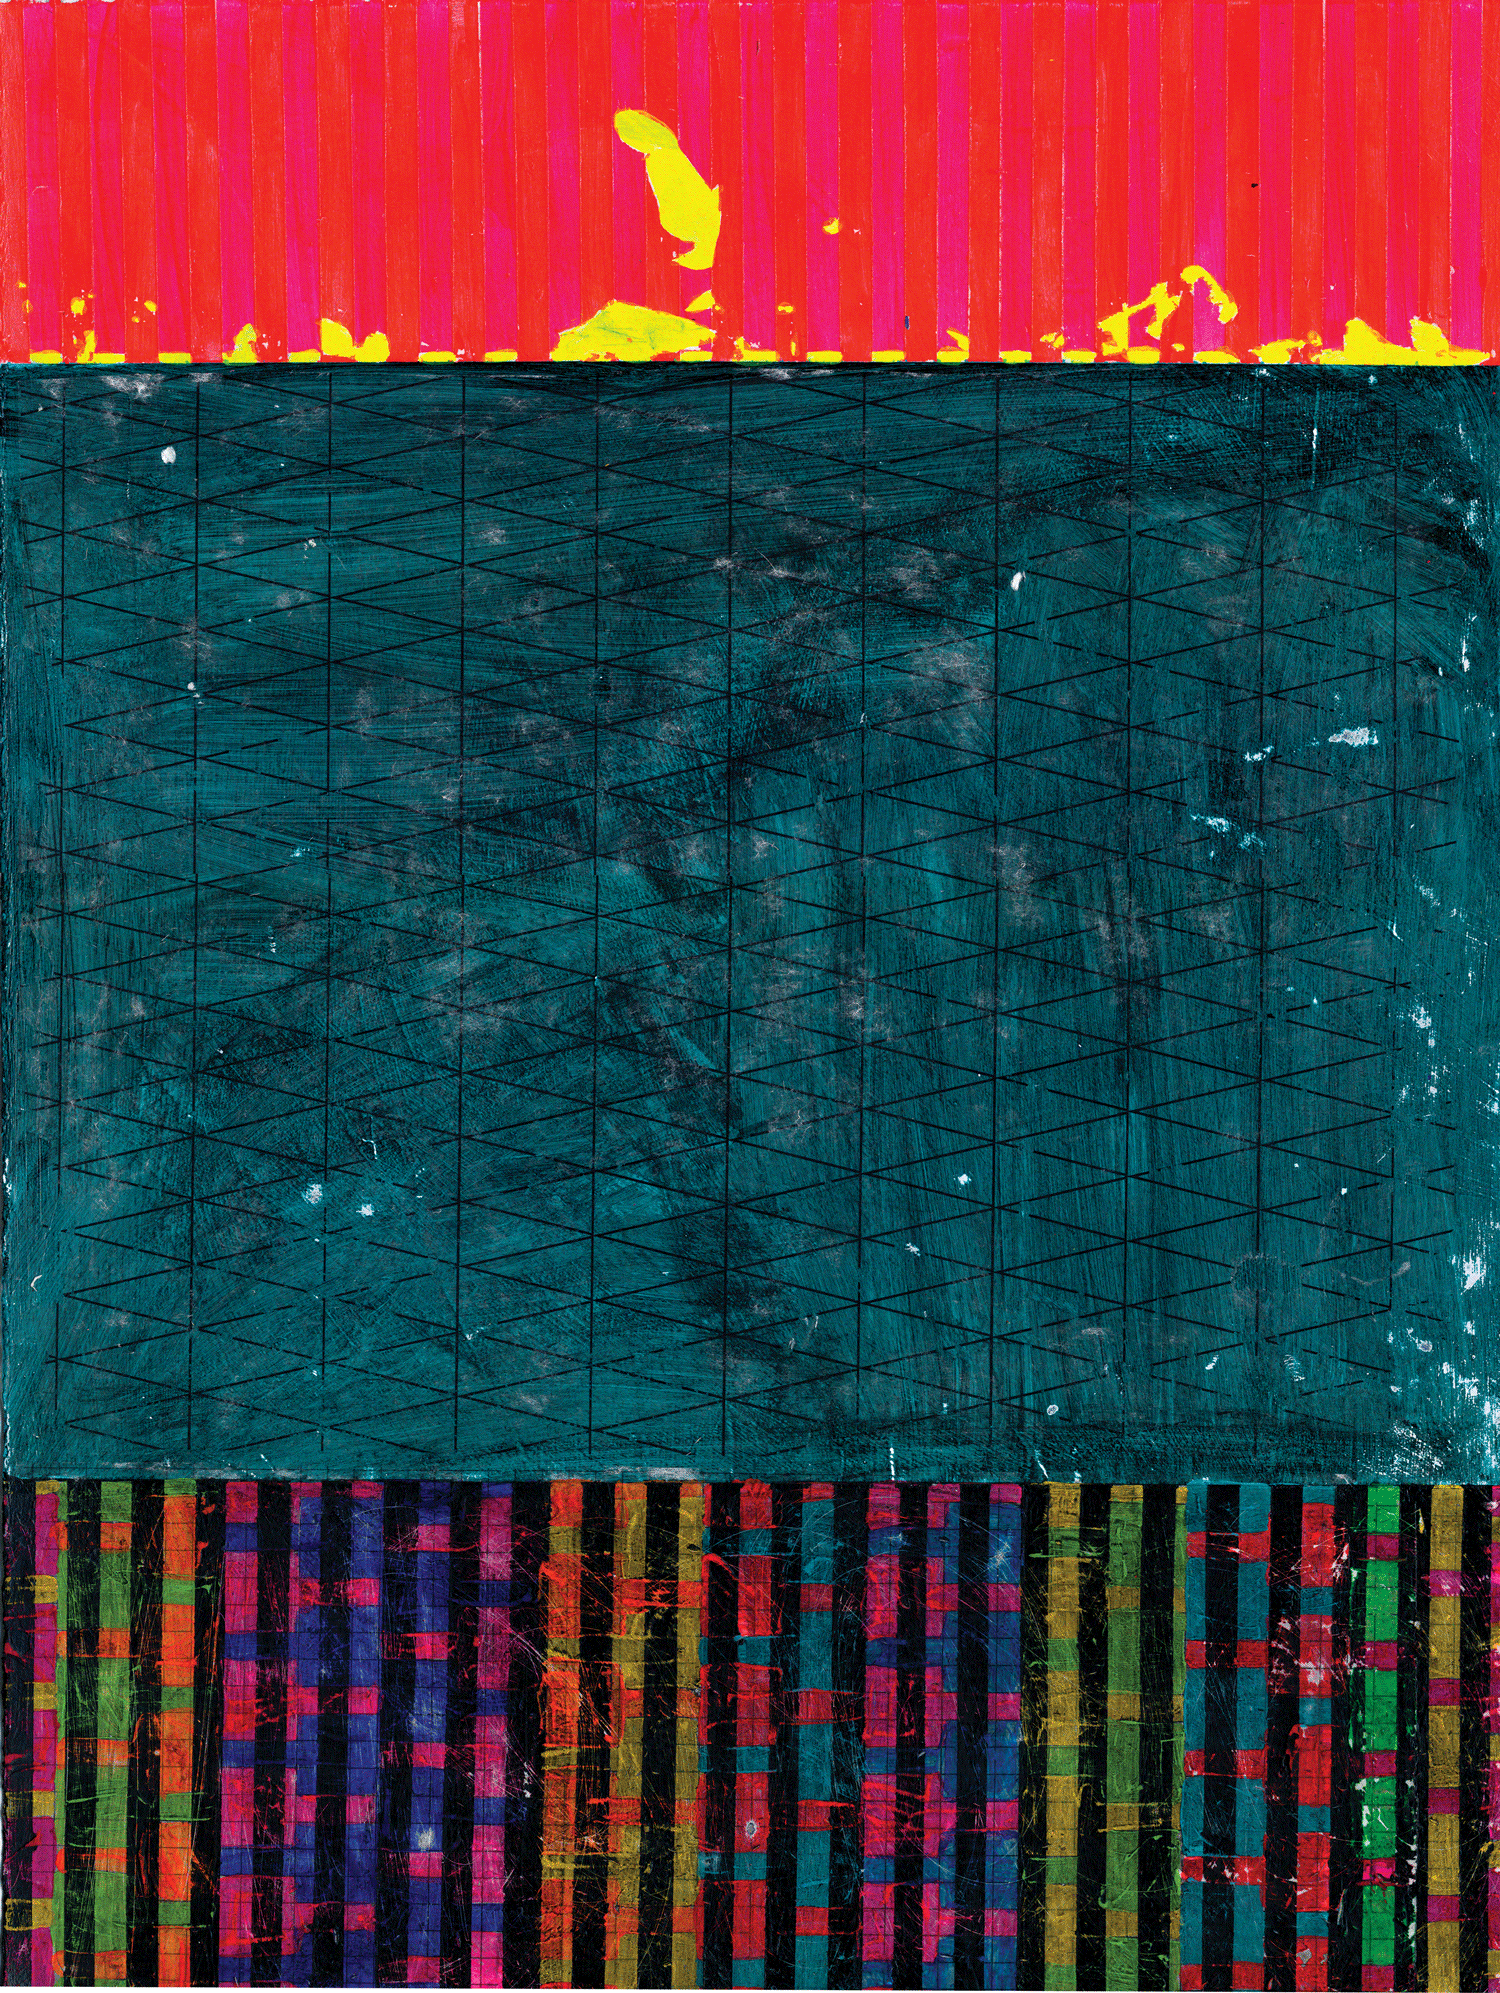   NY13#27, 11" x 15", mixed mediums on paper, 2013   available at Etsy   textiles at Spoonflower   other wares at Society 6  